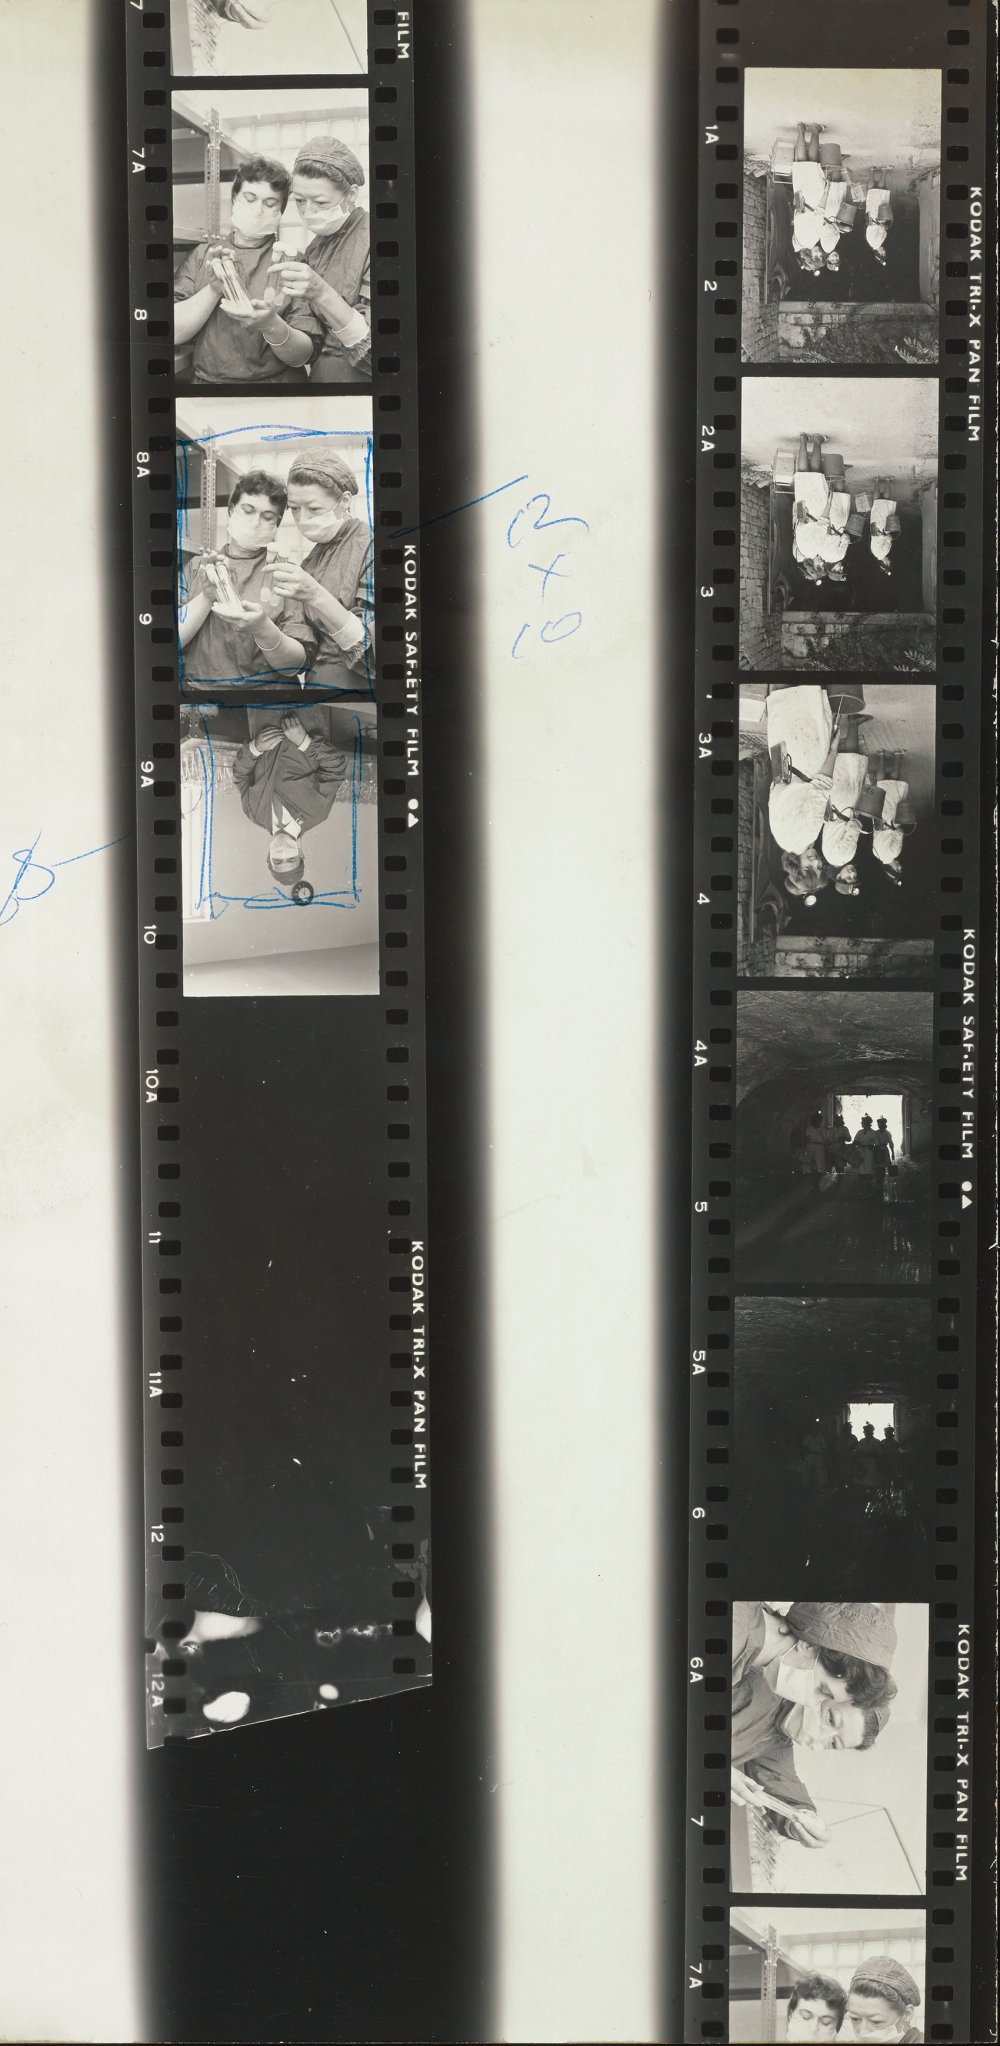 Strip of photographs showing scenes at a mushroom farm in 1963